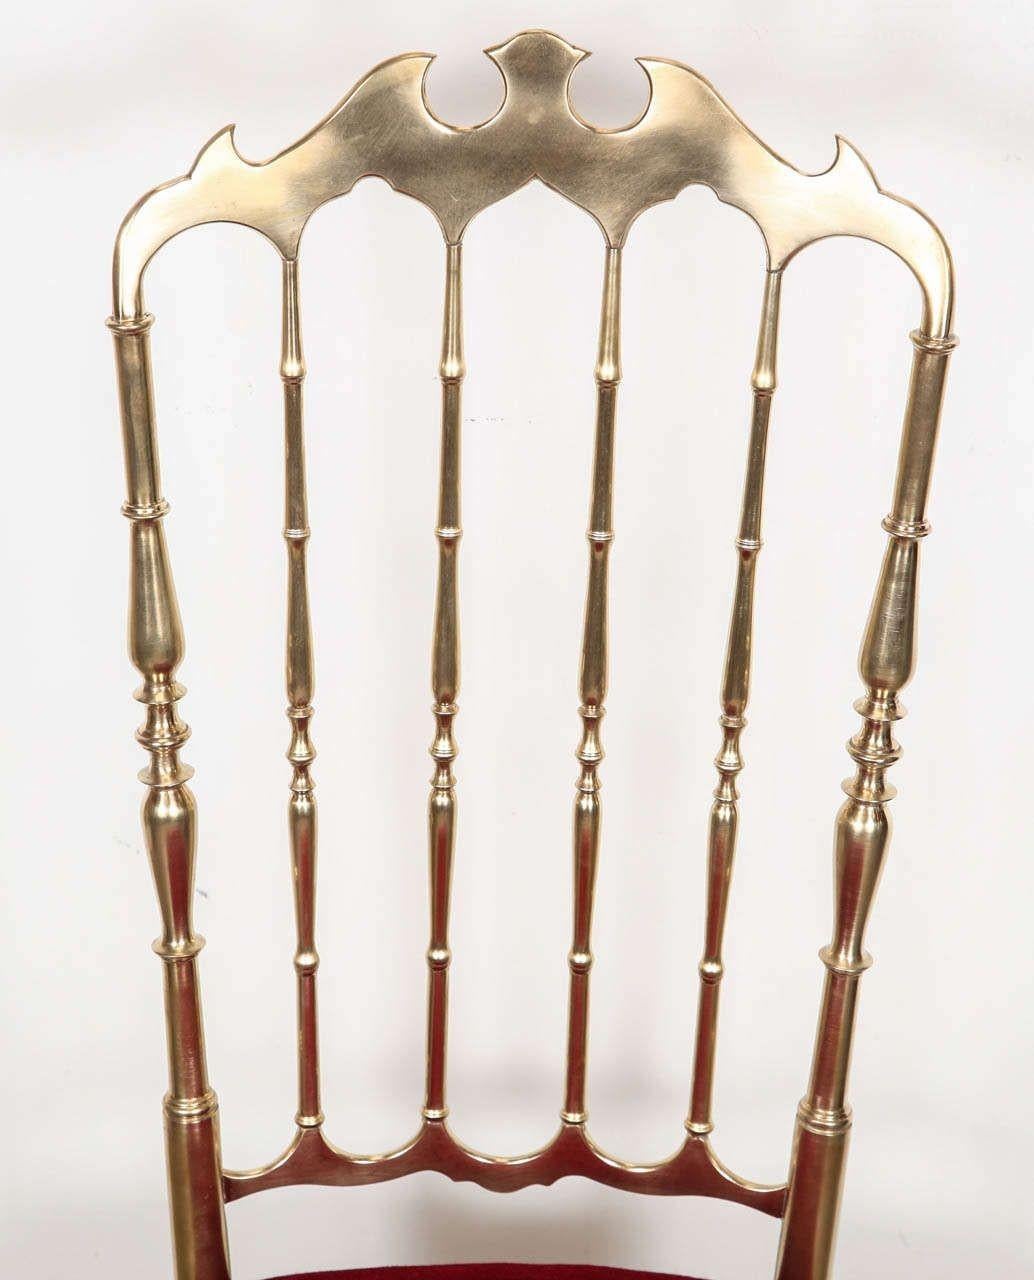 Hollywood Regency 1960's Brass Chairs by Chiavari Italy, a Pair For Sale